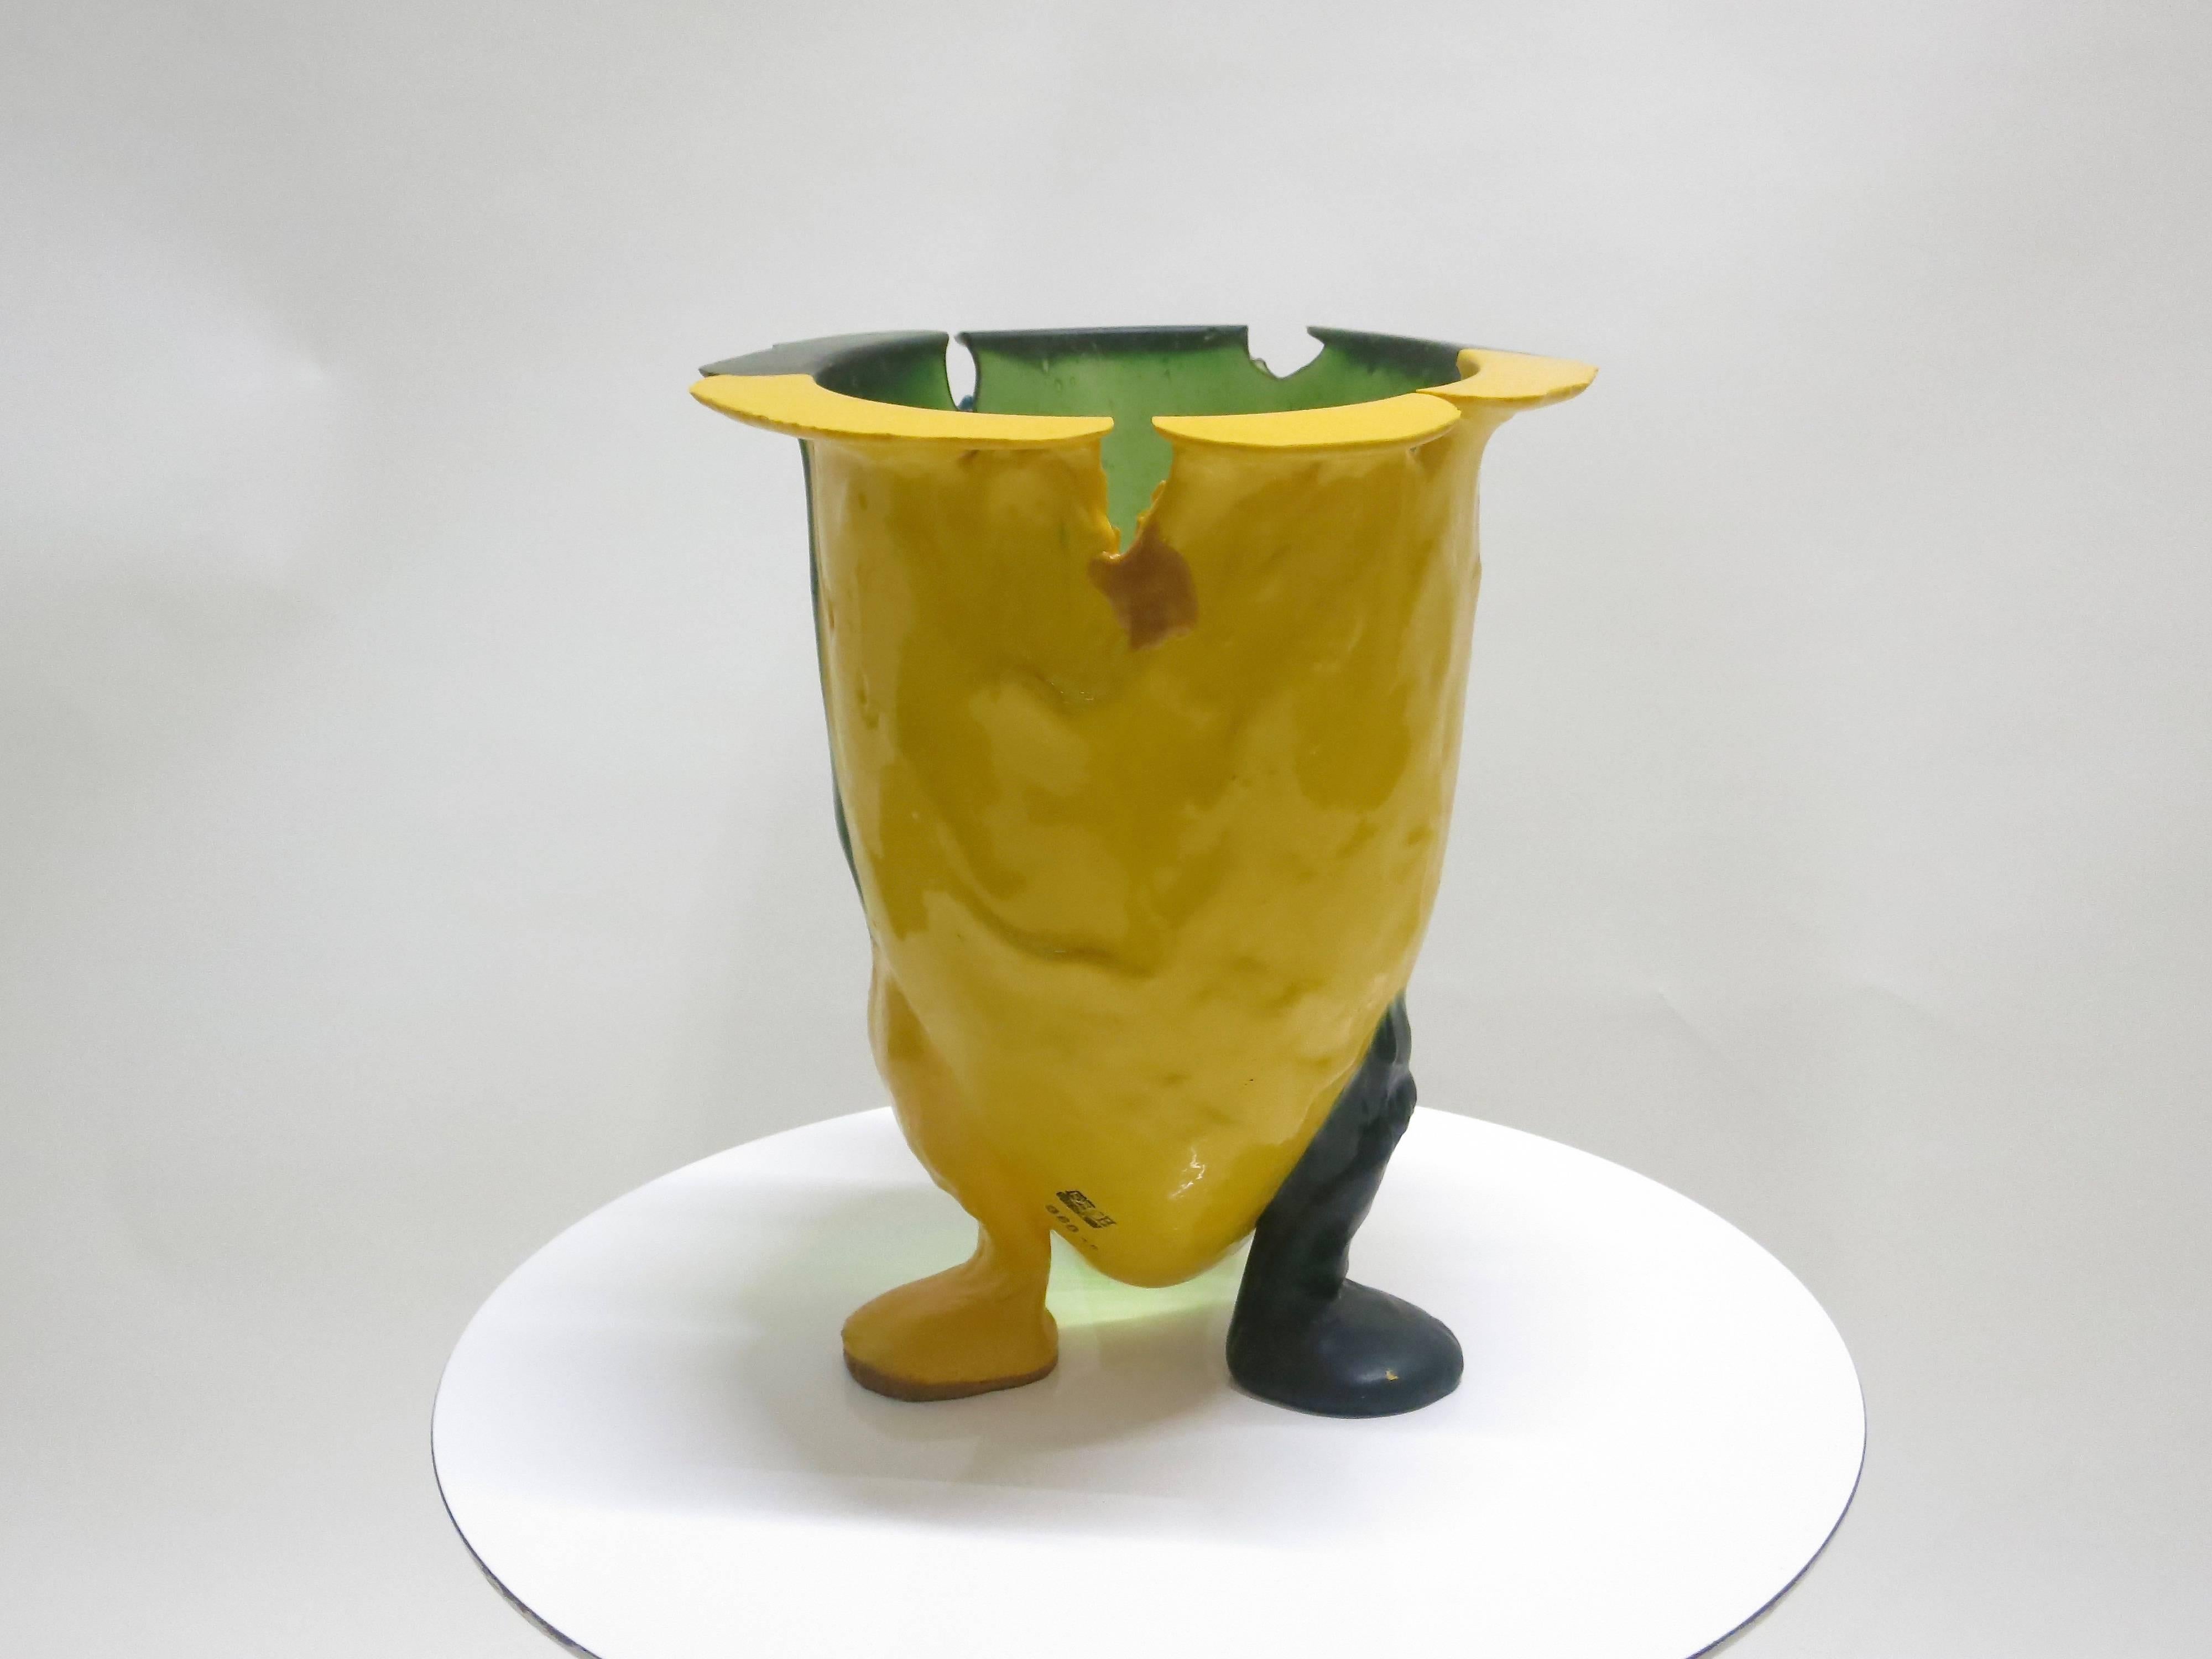 Brilliant yellow and green soft resin. The colors blend together to form a fabulous example of  Gaetano Pesce Amazonia Vase. Stamped Fish Design. Purchased from Artist in the 1990's. Single owner all info available upon request